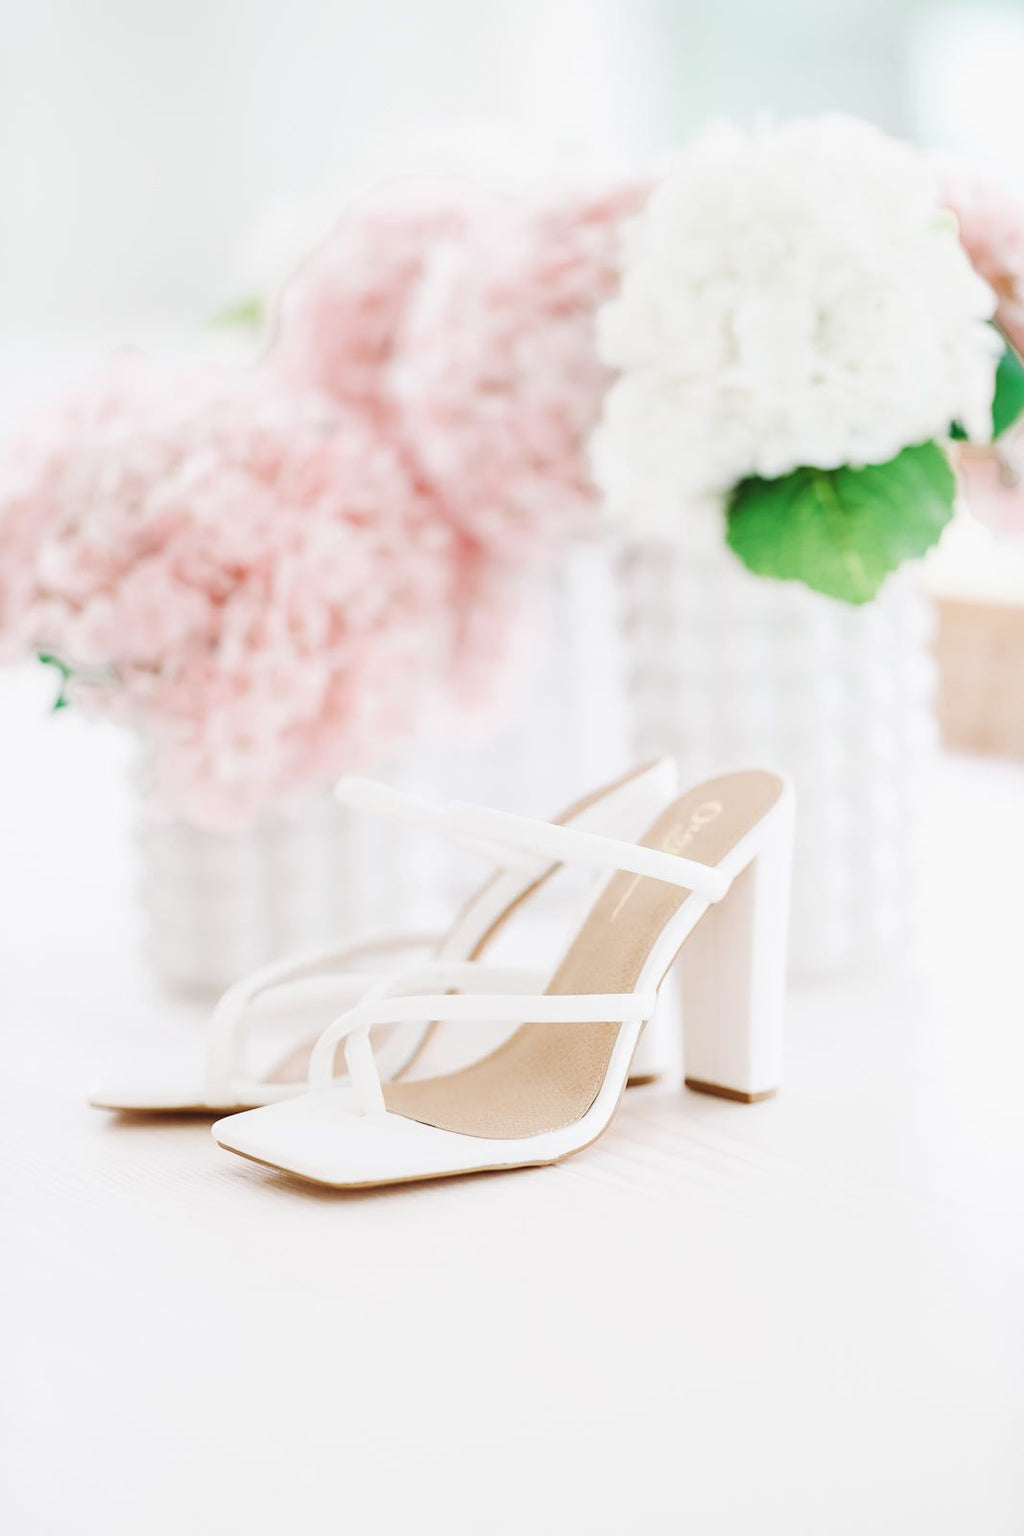 HAZEL & OLIVE Oh So Perfect Strappy High Heels - White